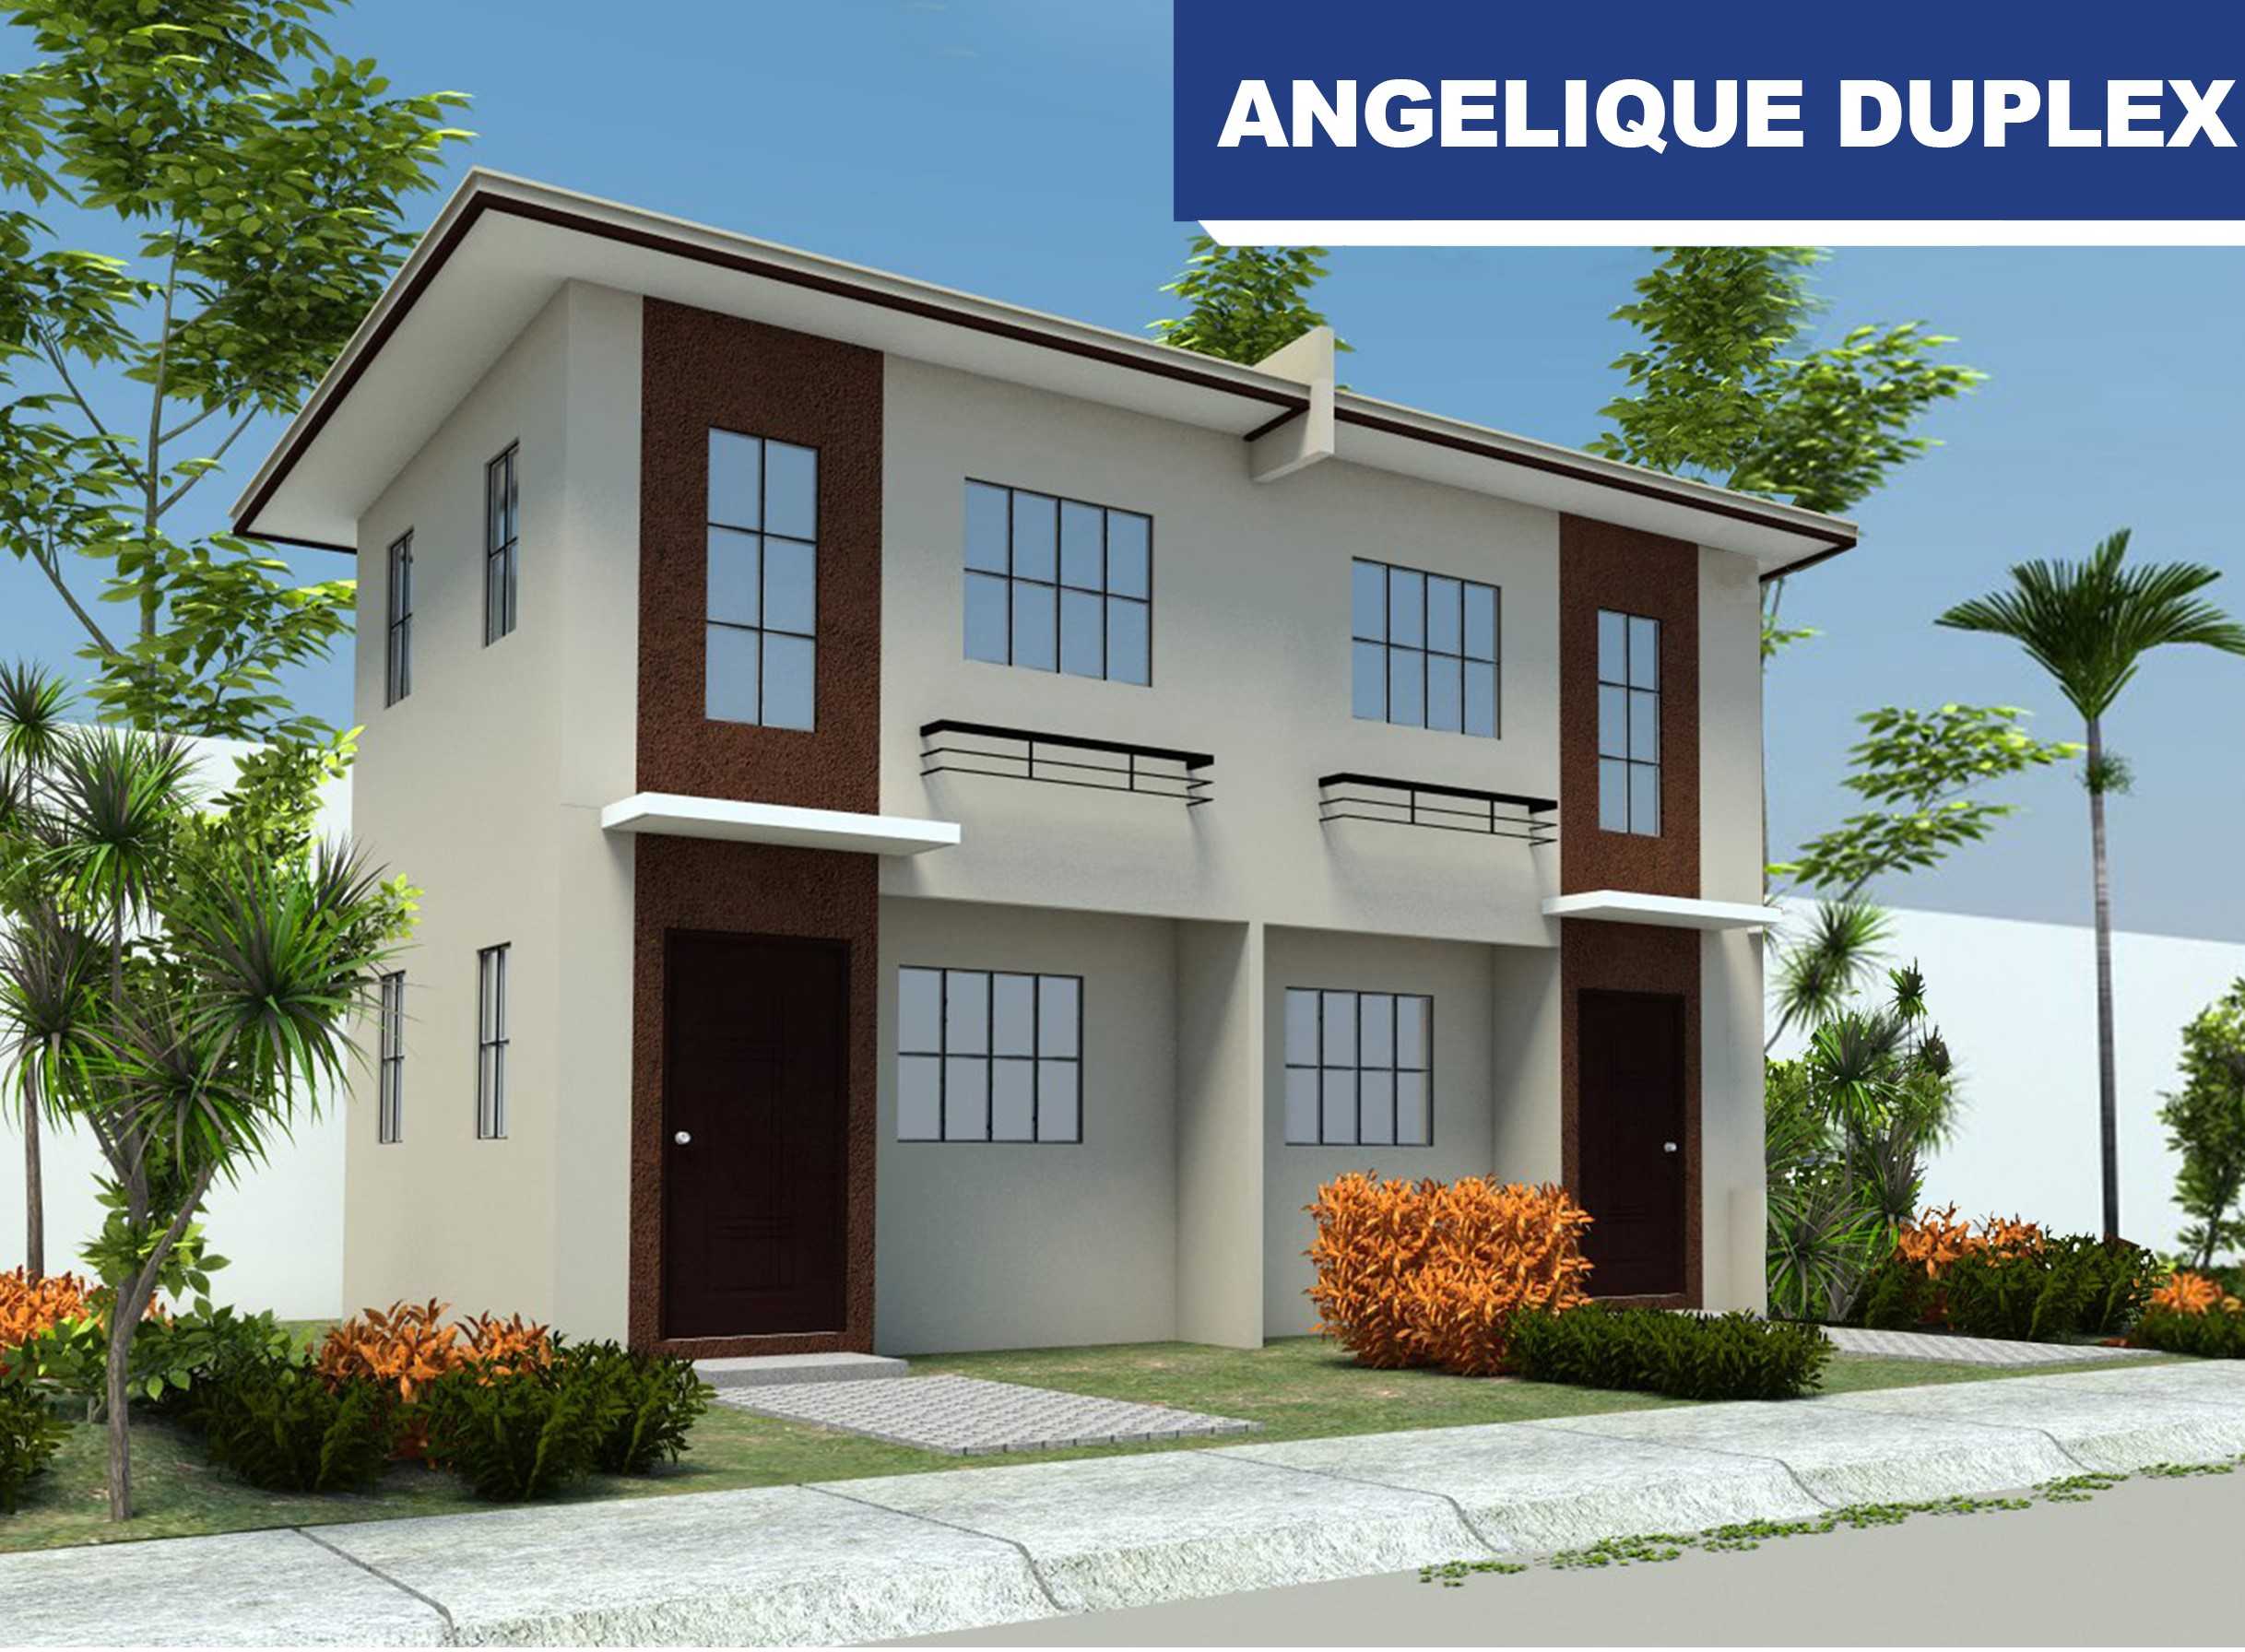 2_Angelique-Duplex-House-Specifications-v.jpg